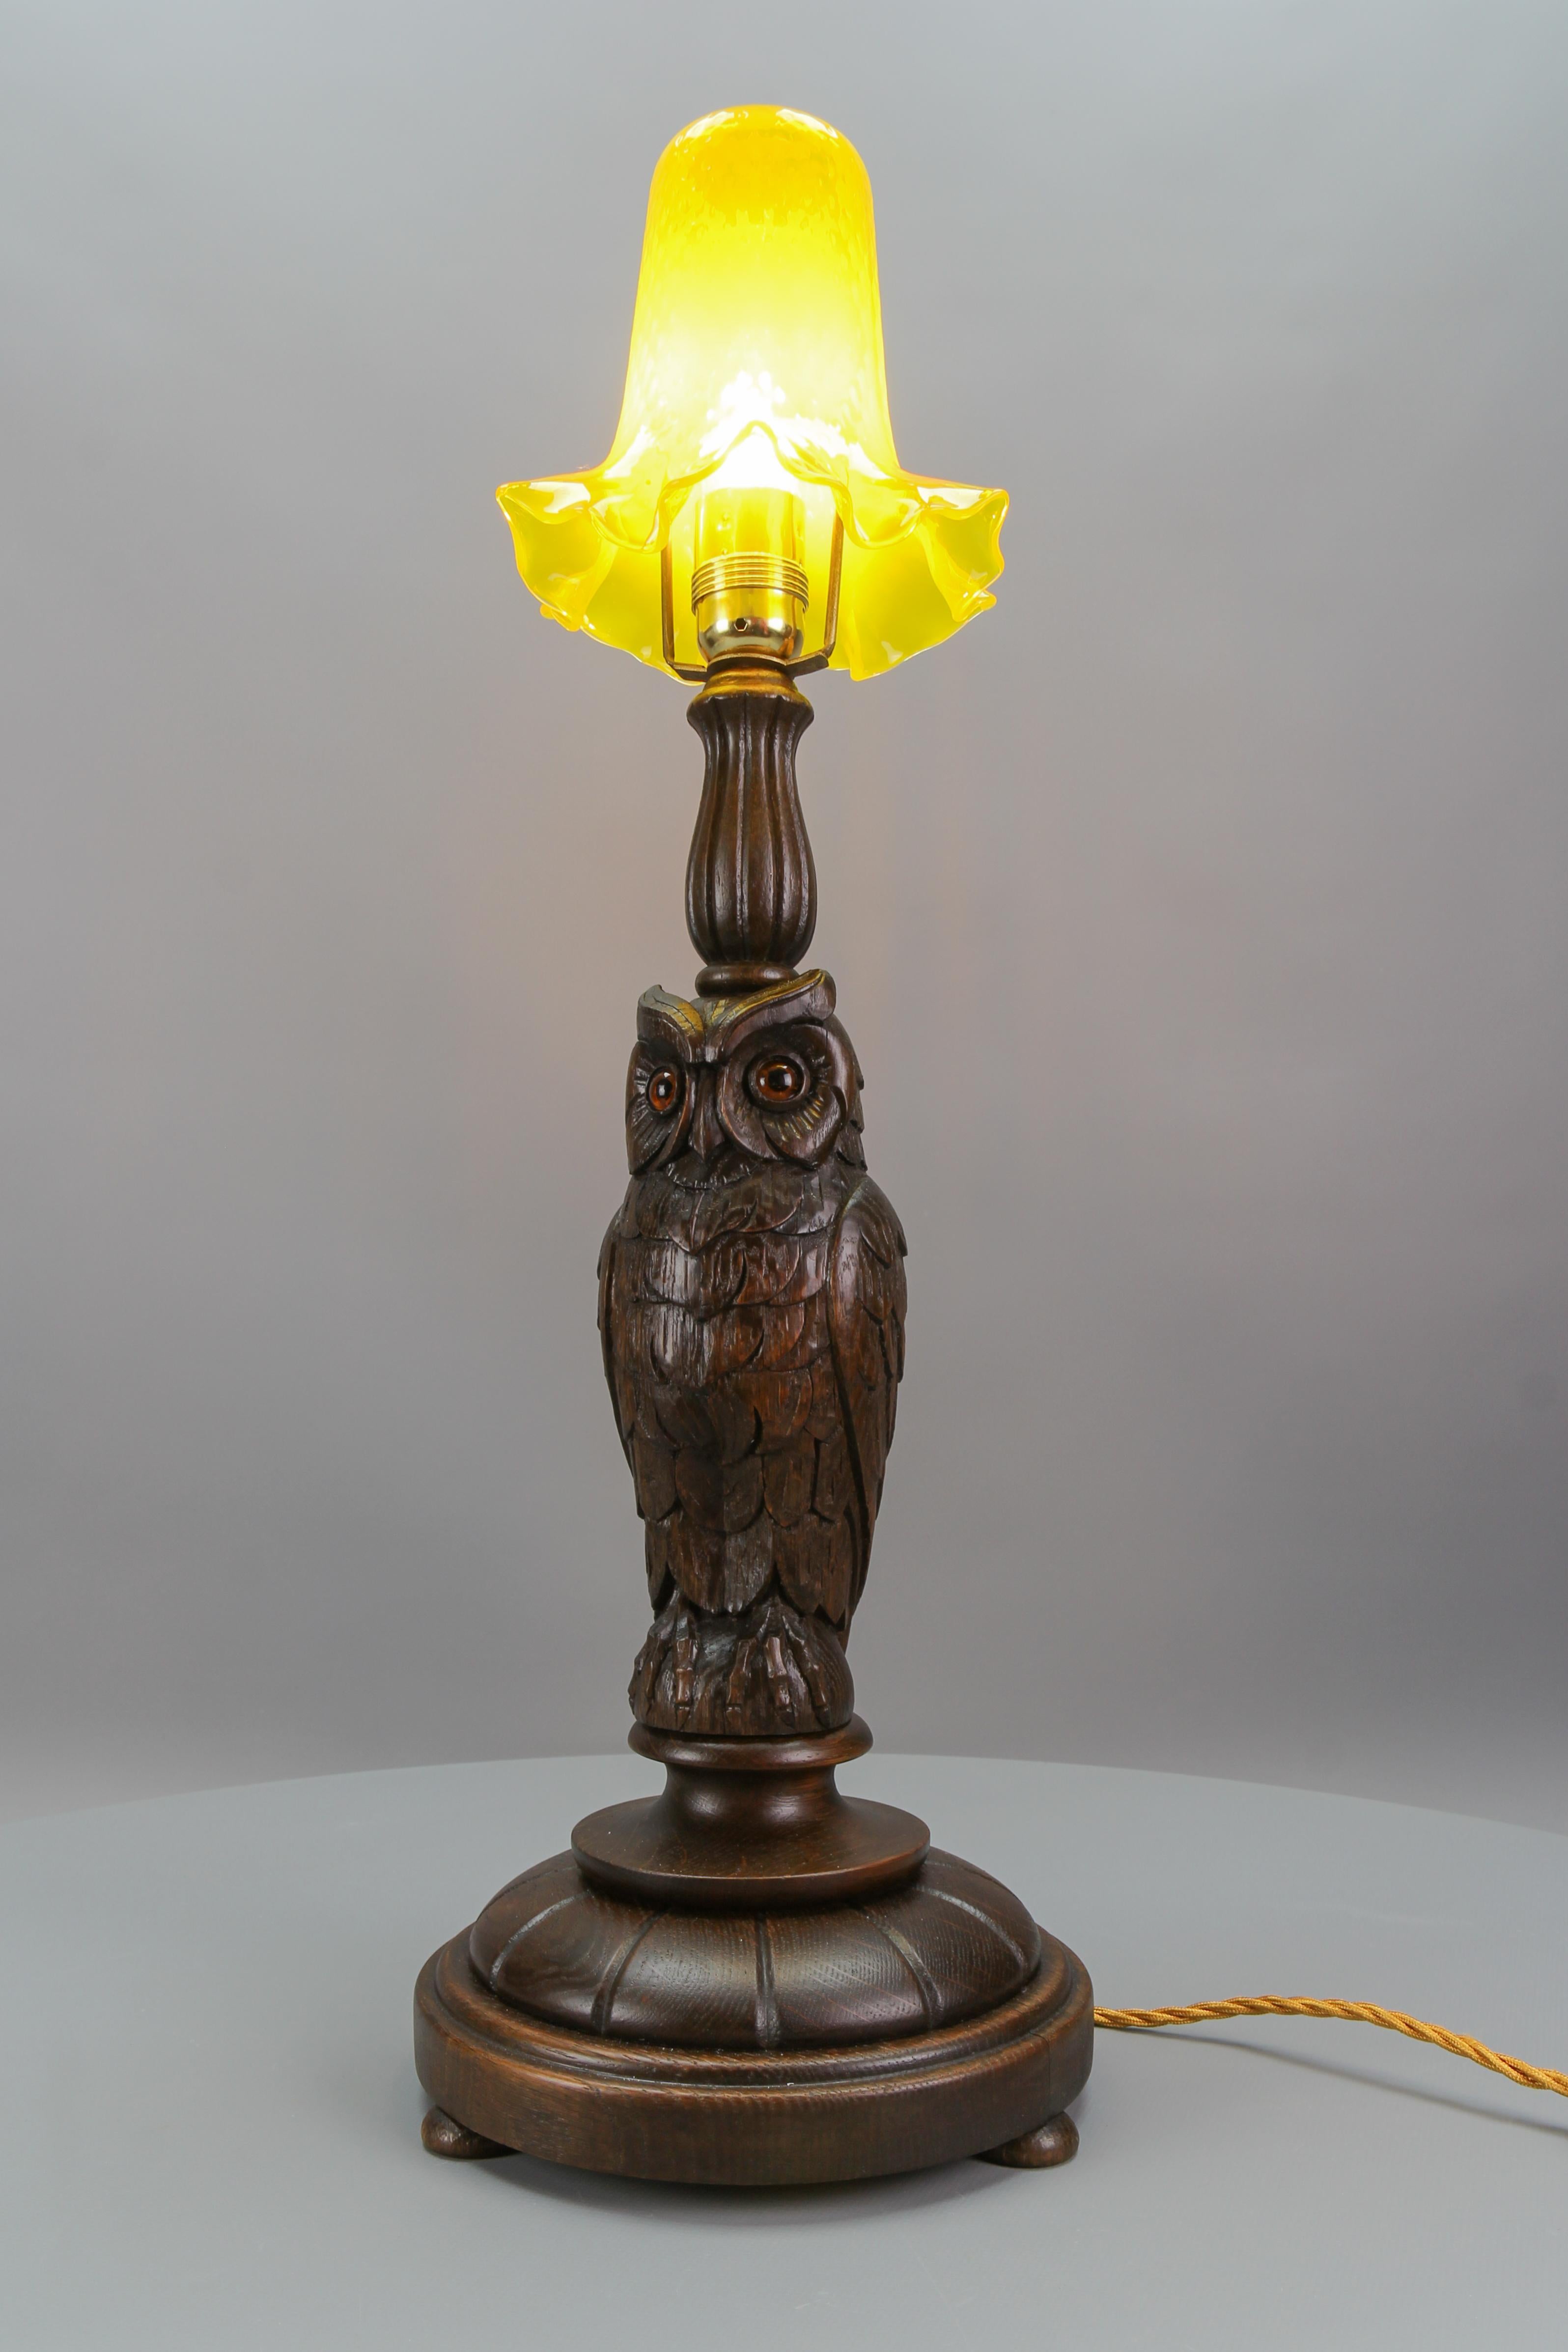 German Art Deco Table Lamp with Owl Sculpture and Yellow Glass Lampshade, ca. 1920 For Sale